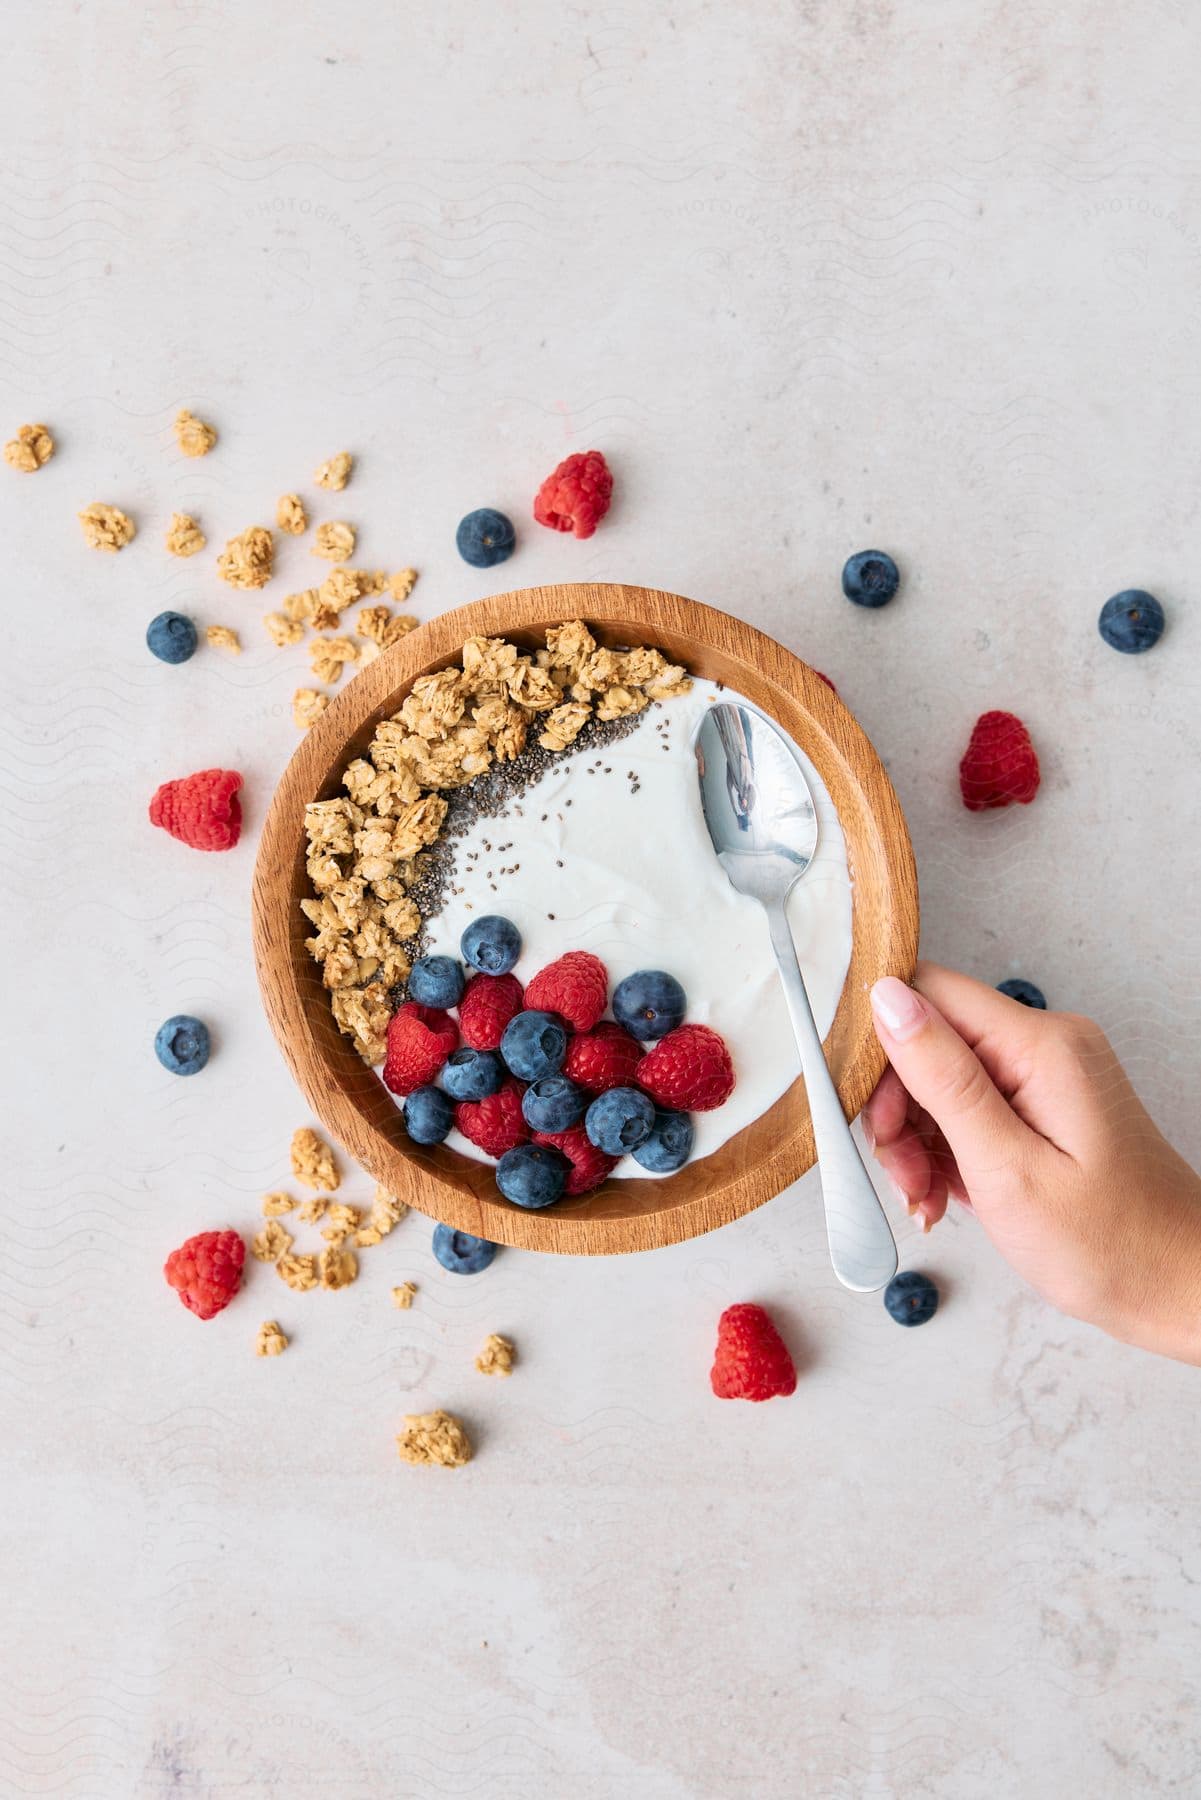 A woman's hand touches a bowl of granola, yogurt and fresh berries.